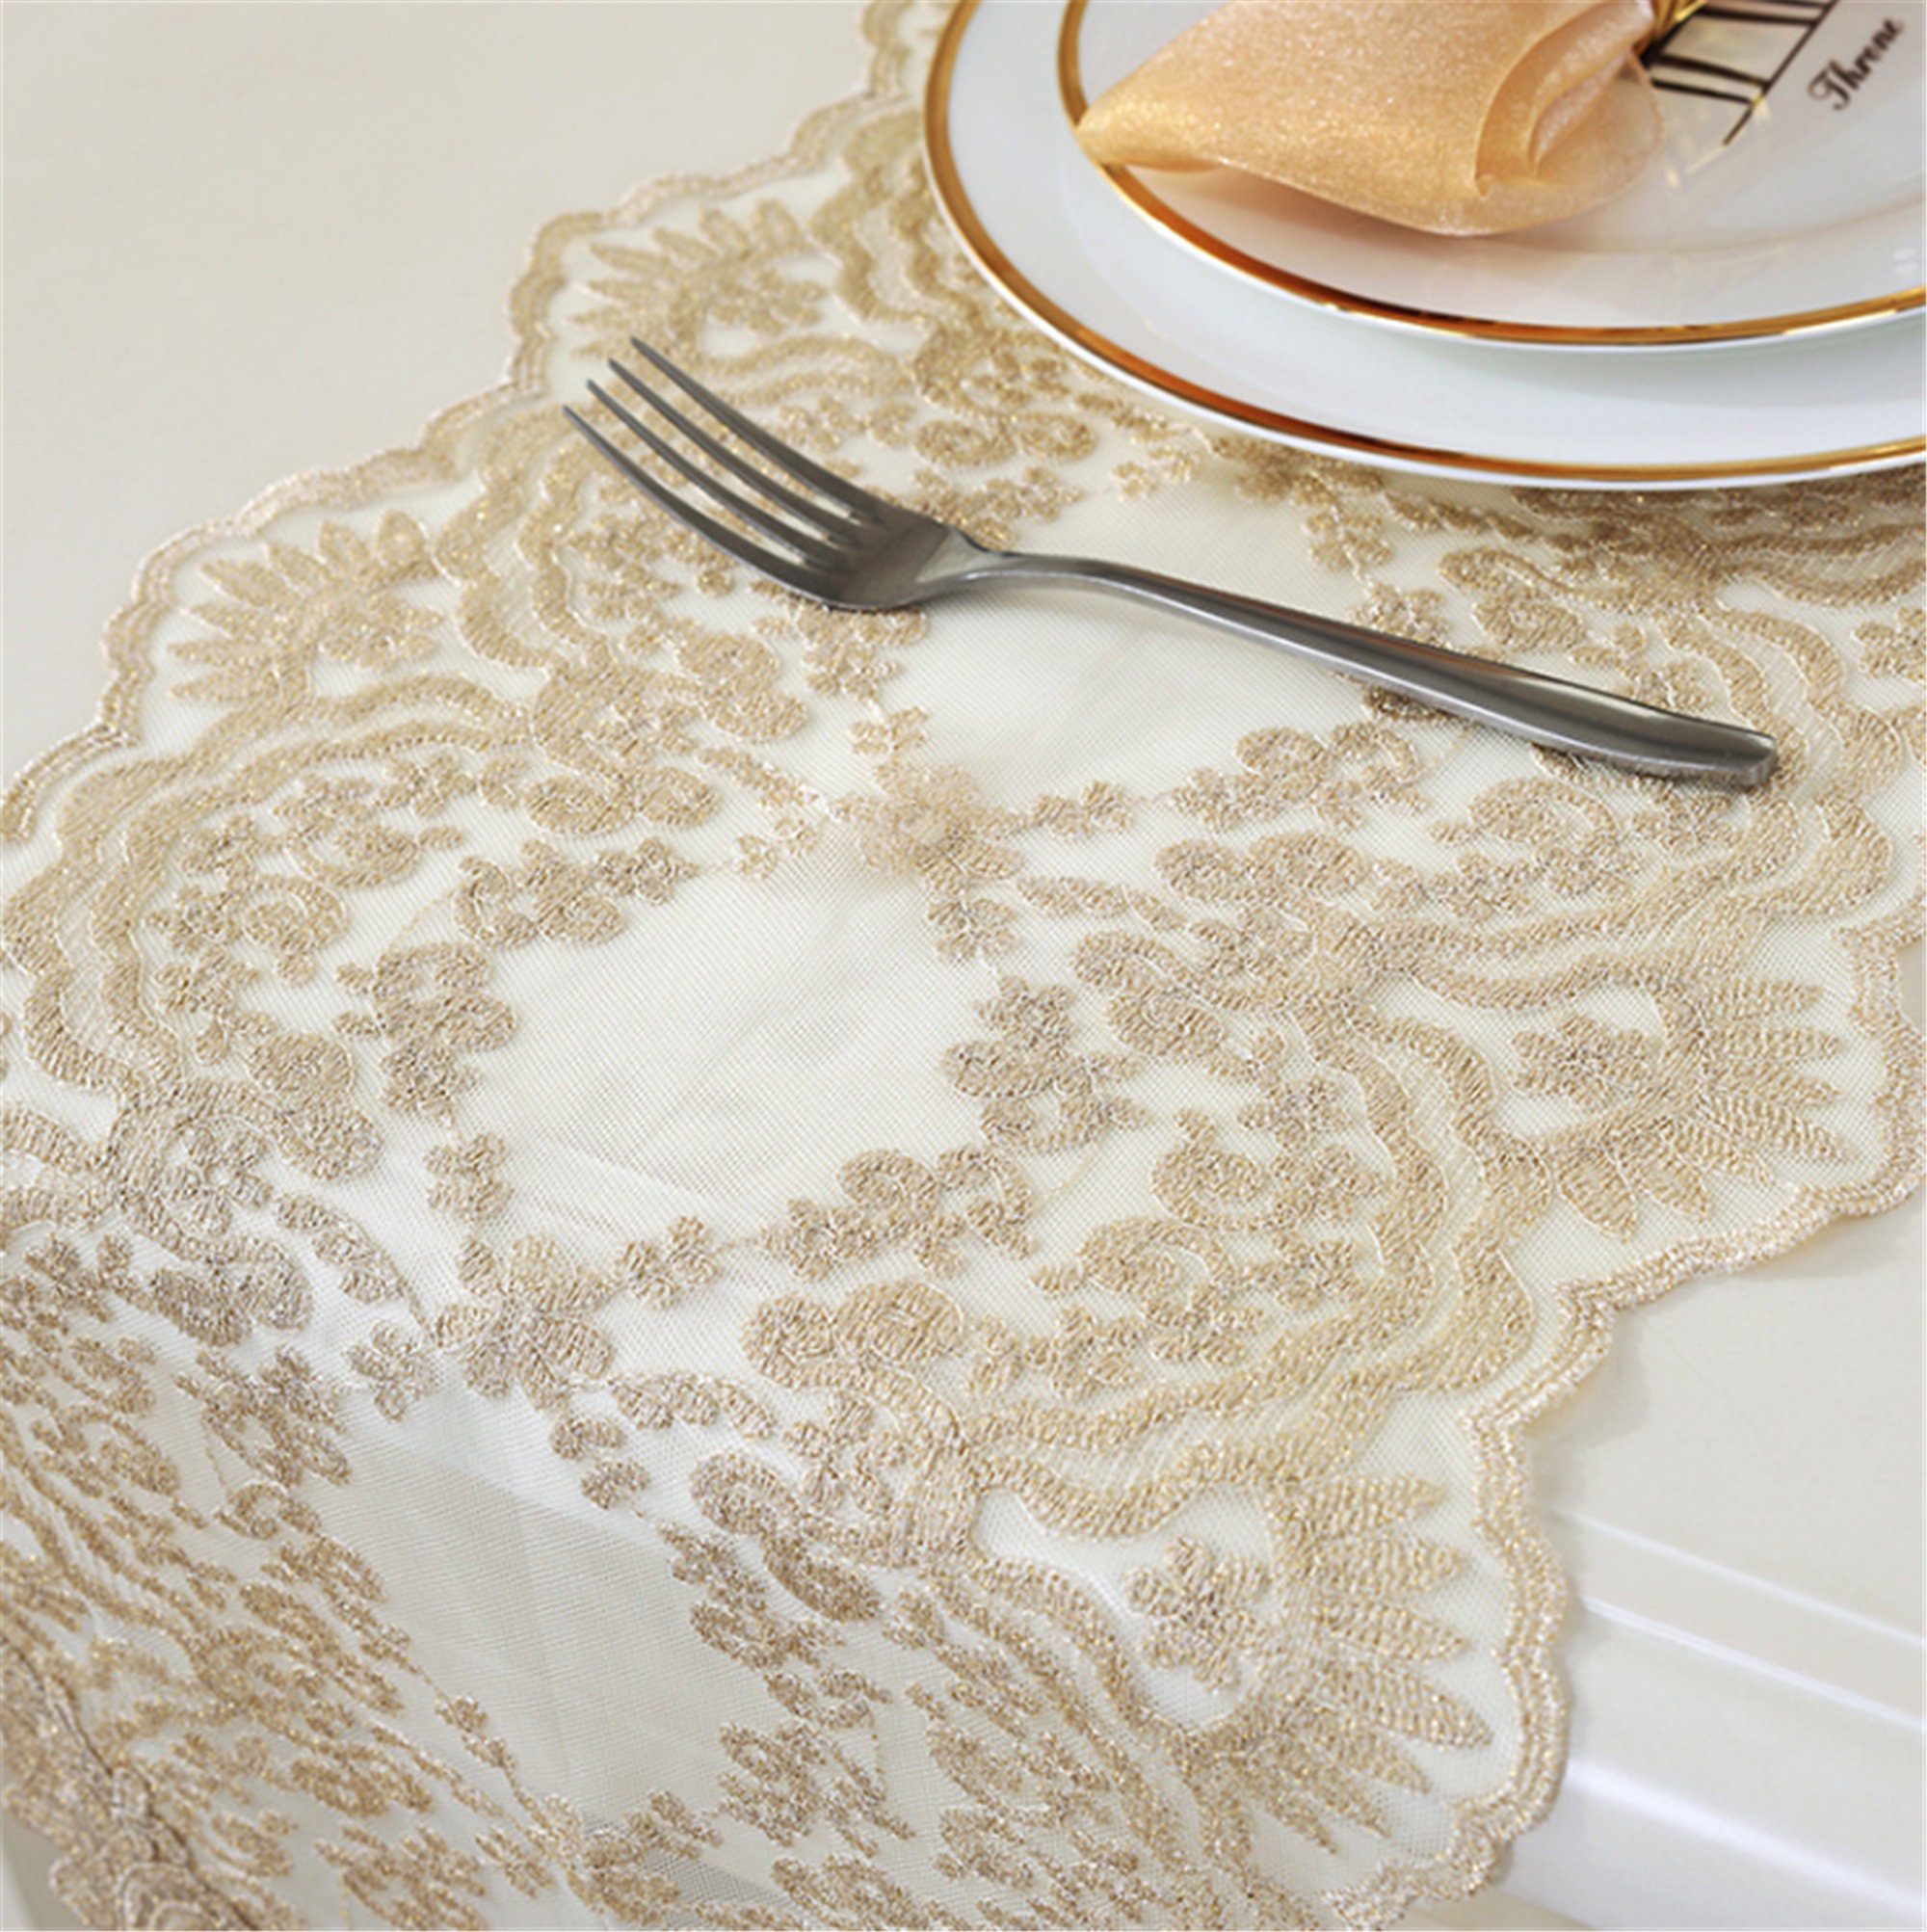 Quasimoon Vintage White Lace Style No.2 Table Runner (12 x 108)